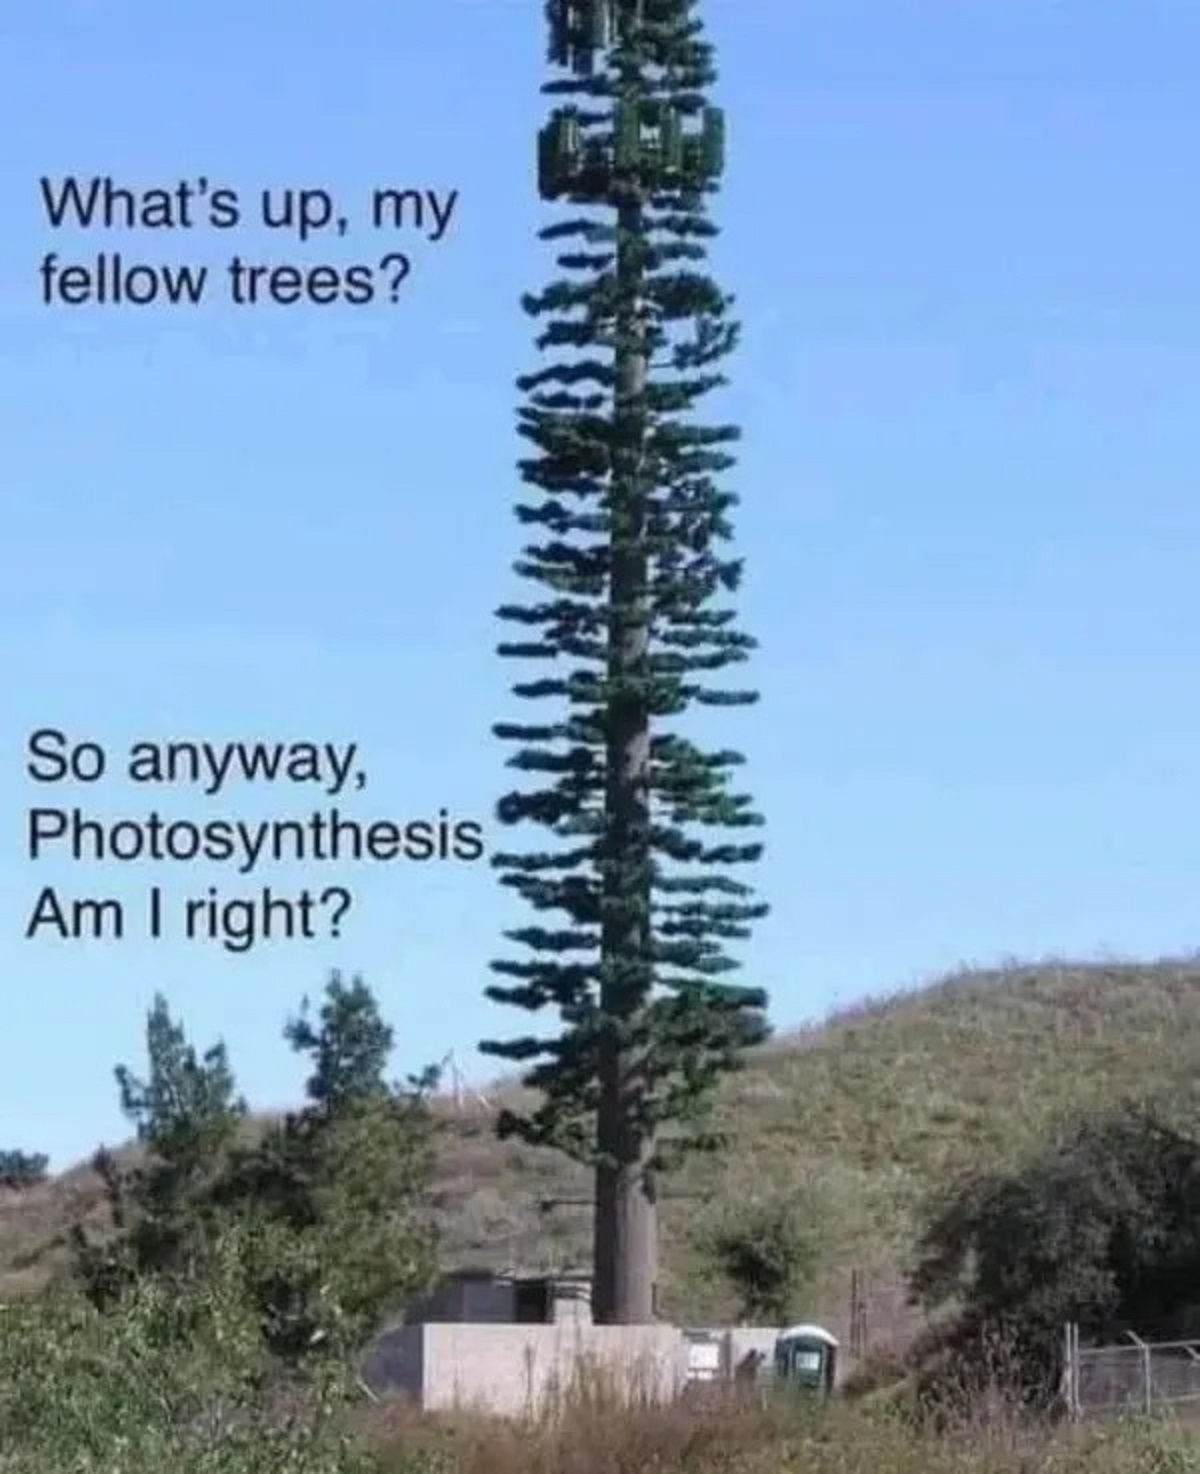 fake tree cell tower meme - What's up, my fellow trees? So anyway, Photosynthesis, Am I right?